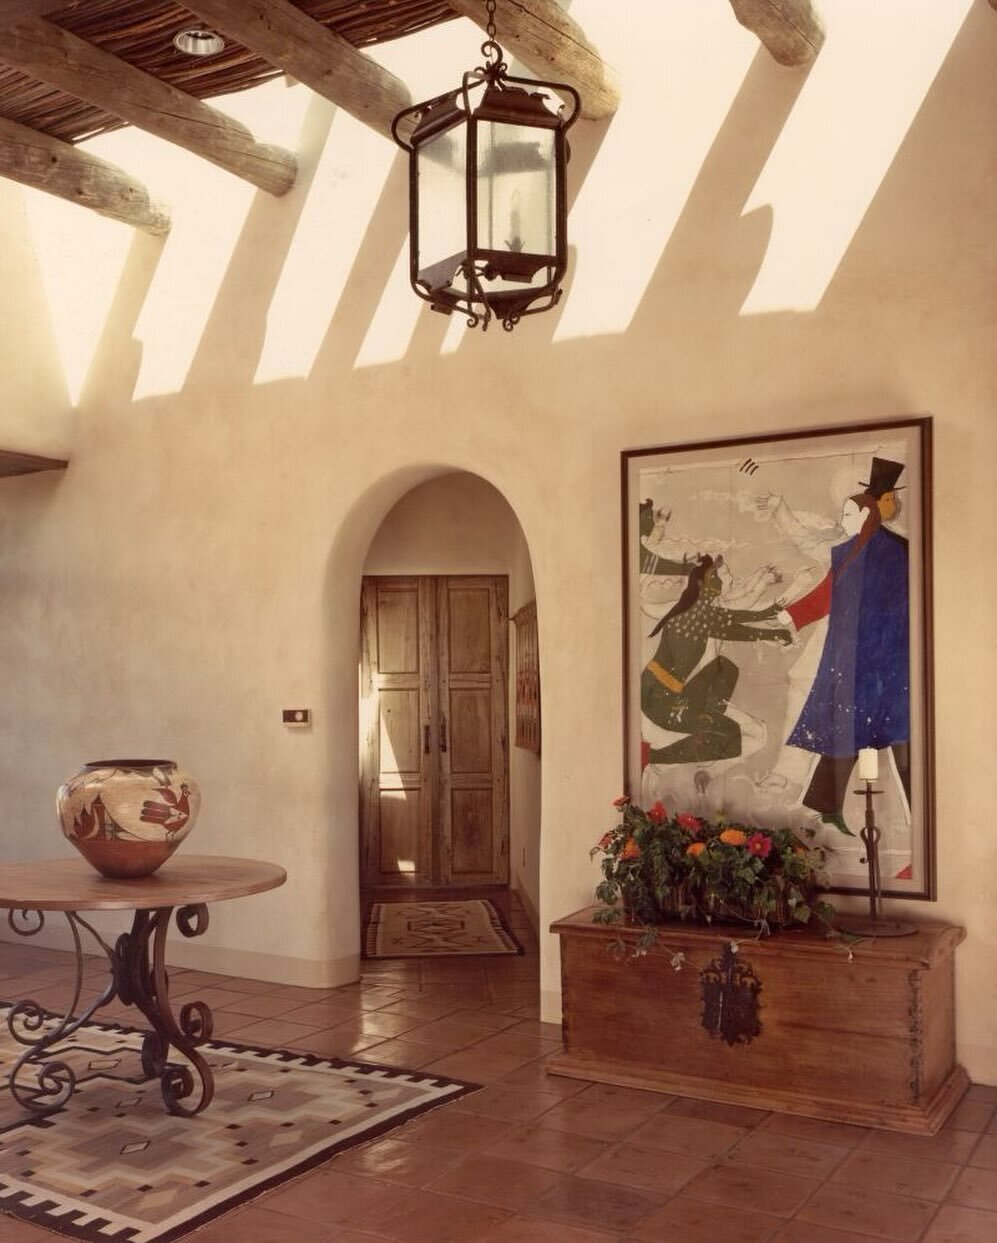 Adobe-style homes author the streets of many southwestern American towns and this Santa Fe ranch house we designed for a client is no exception. The exposed wooden beams are reminiscent of the features most common in this original method of home buil